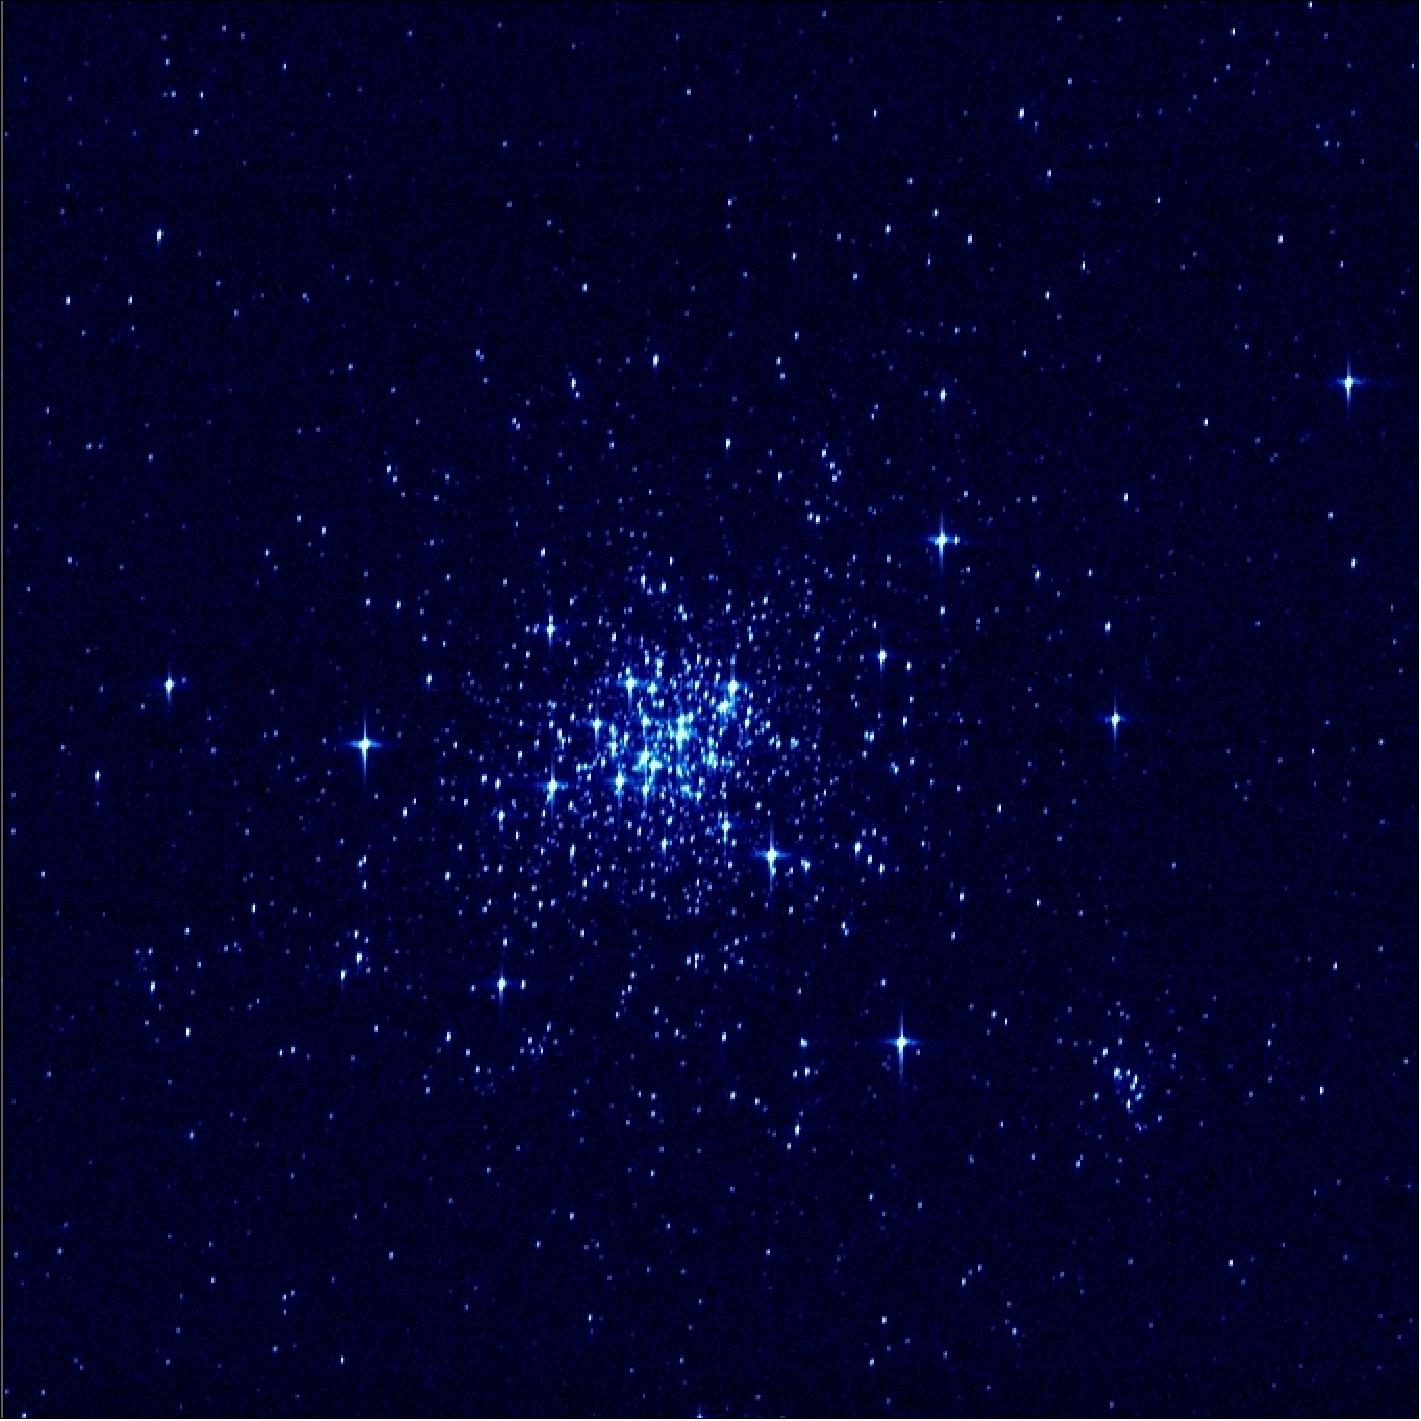 Figure 94: Gaia calibration image shows a dense cluster of stars in the Large Magellanic Cloud, a satellite galaxy of our Milky Way (image credit: ESA, DPAC, Airbus DS)